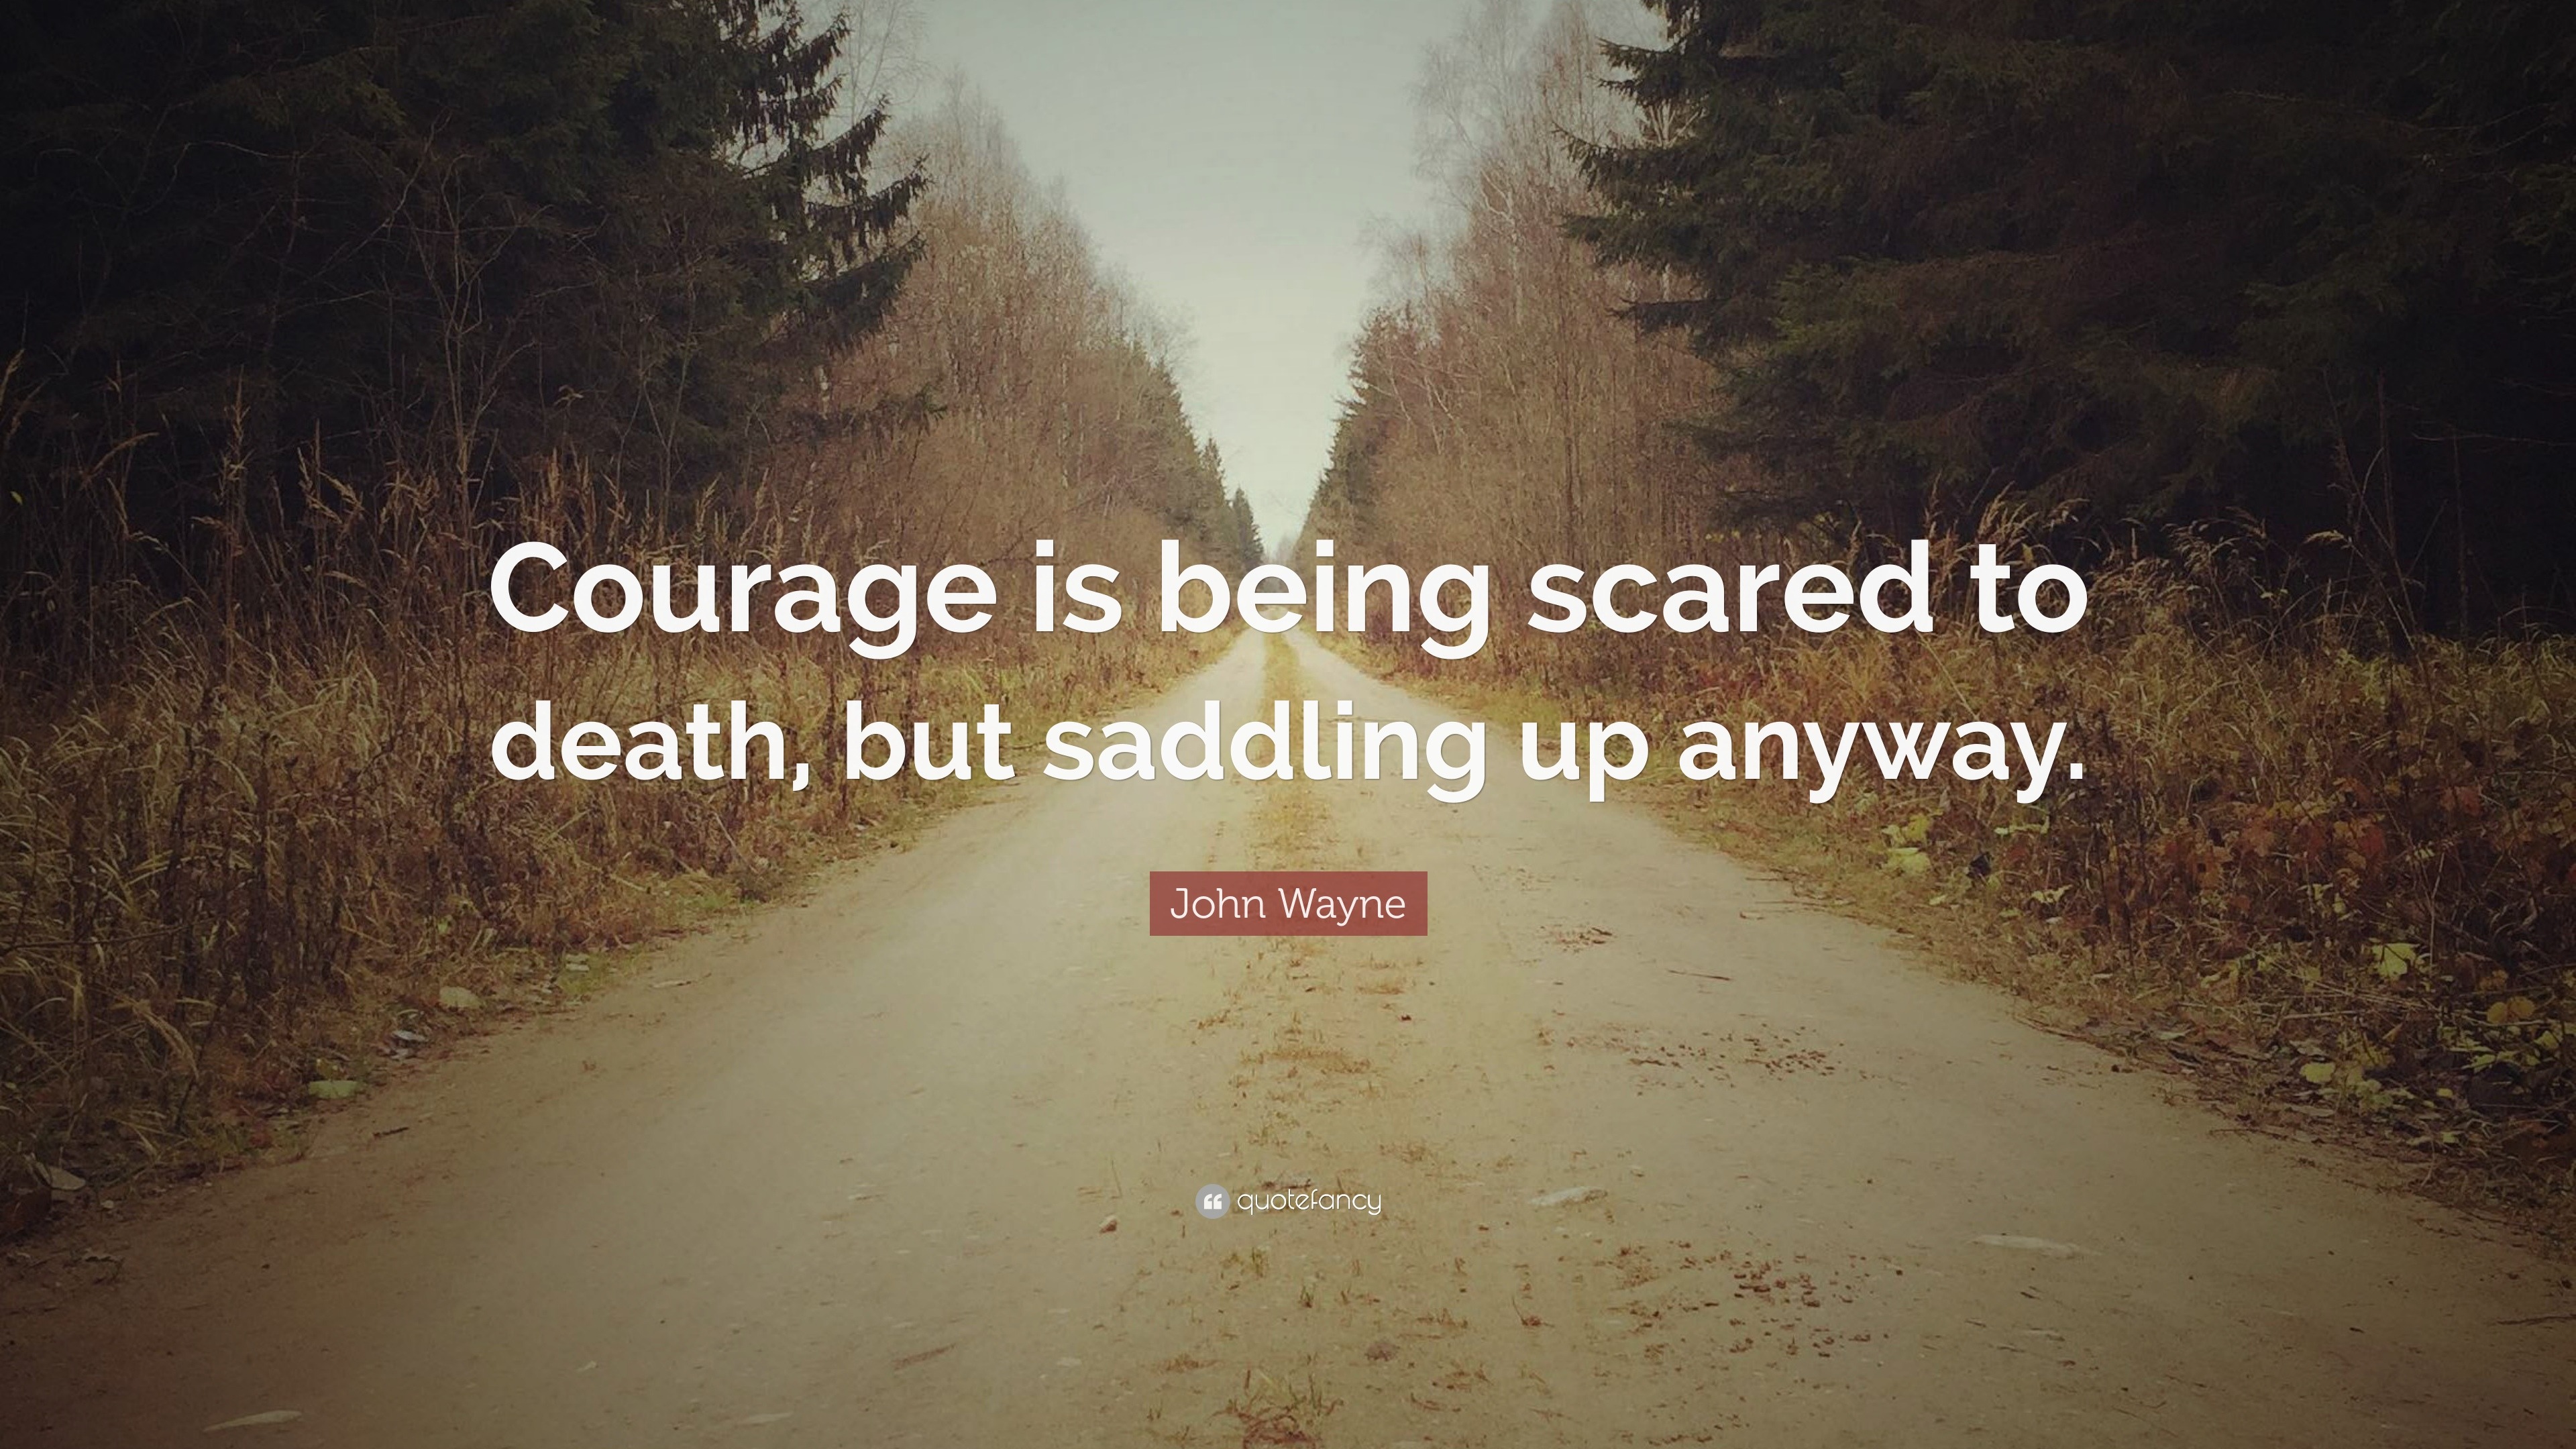 Courage is being scared to death and saddling up anyway. ~ John  Wayne, Inspirational Wood Signs